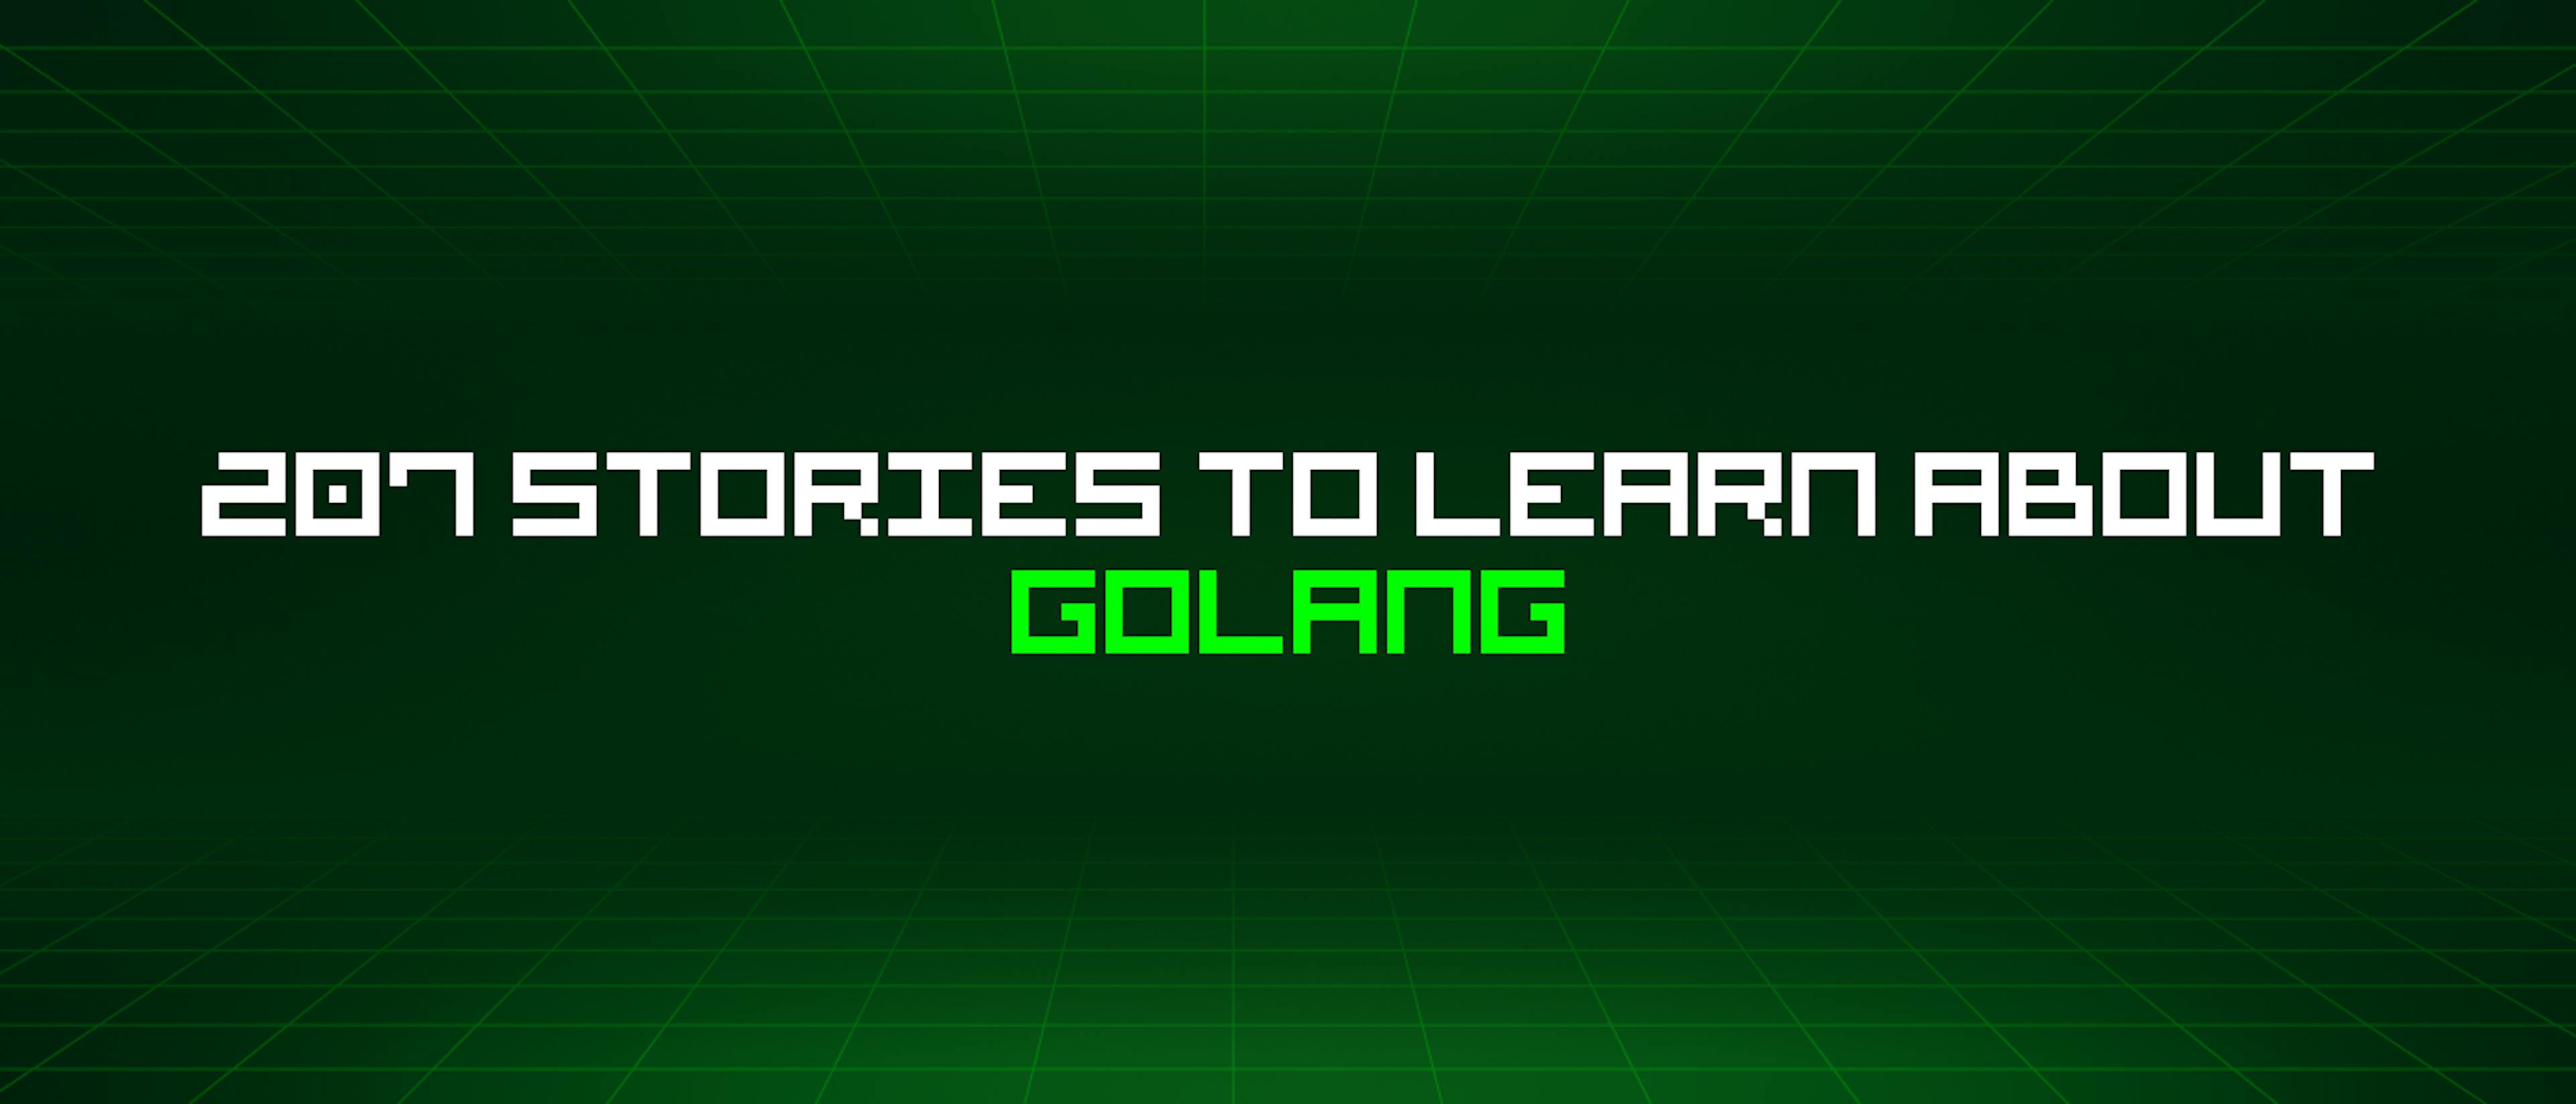 featured image - 207 Stories To Learn About Golang